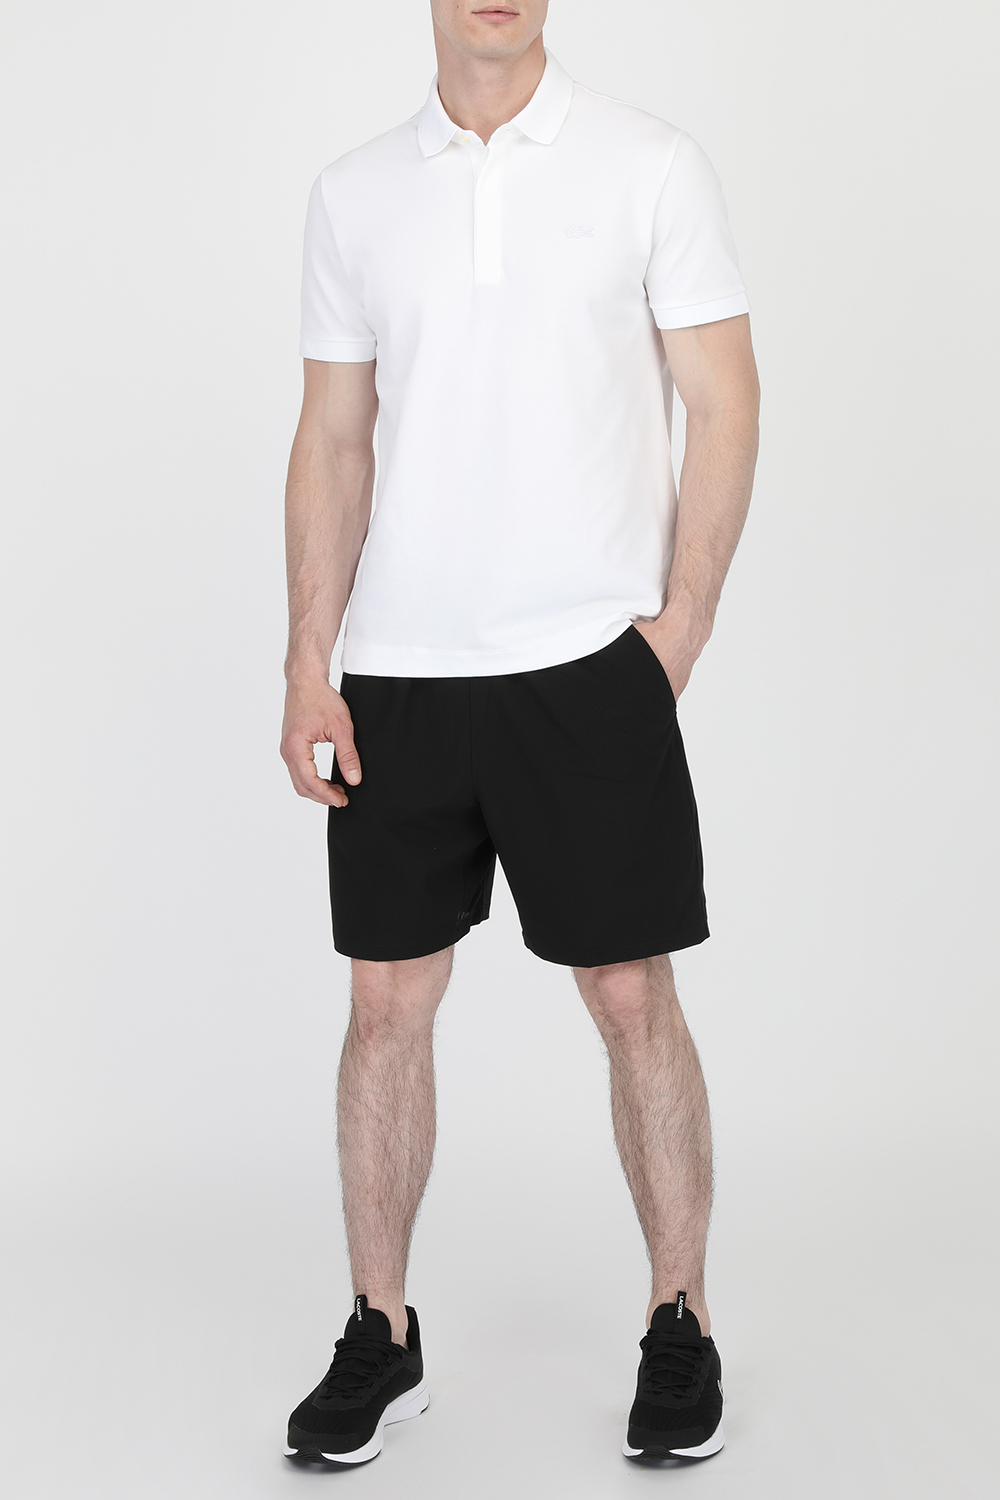 Tennis Stretch Shorts in Black LACOSTE